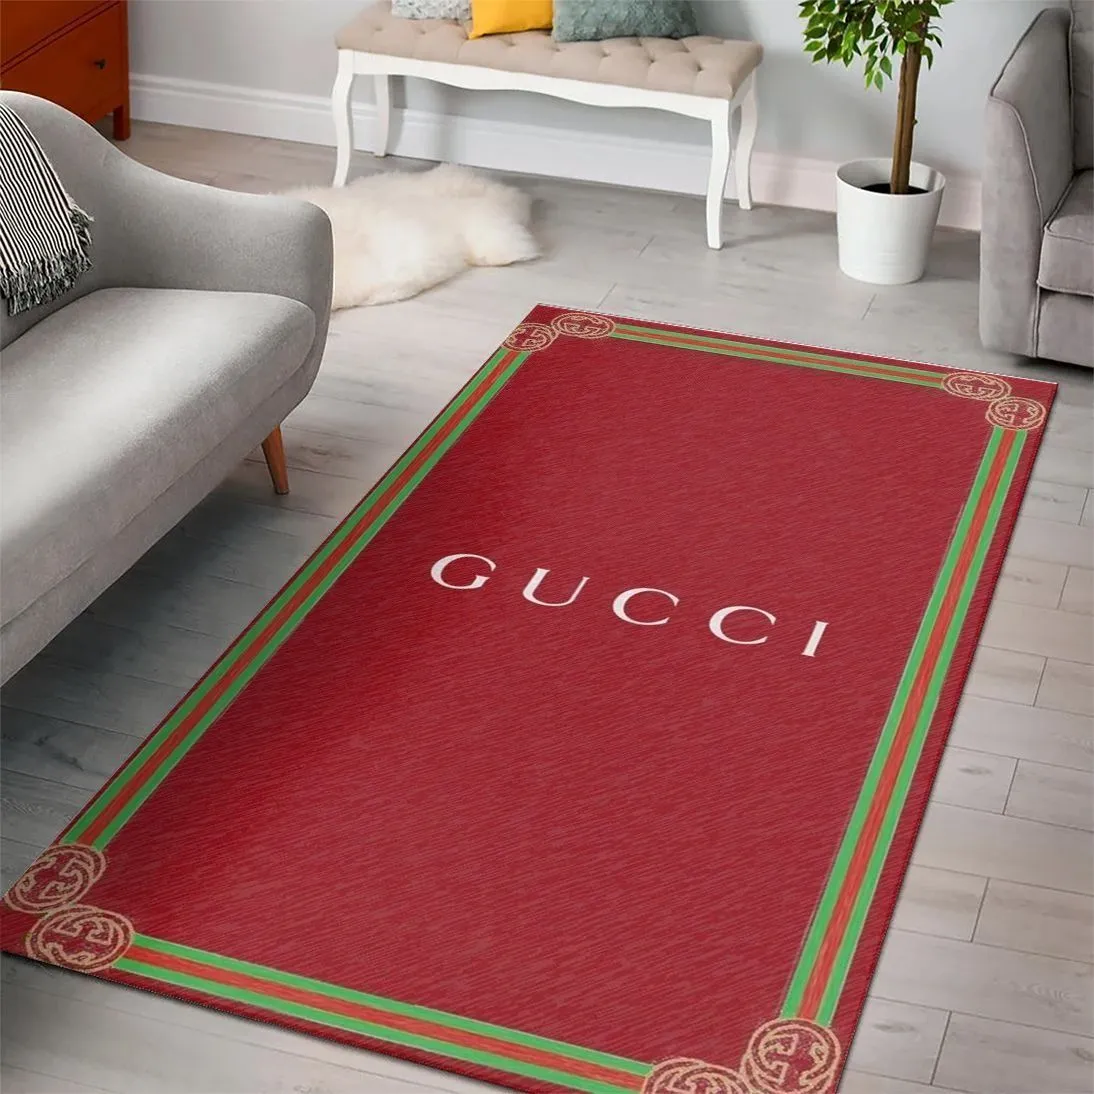 Gucci red Rectangle Rug Area Carpet Home Decor Door Mat Fashion Brand Luxury